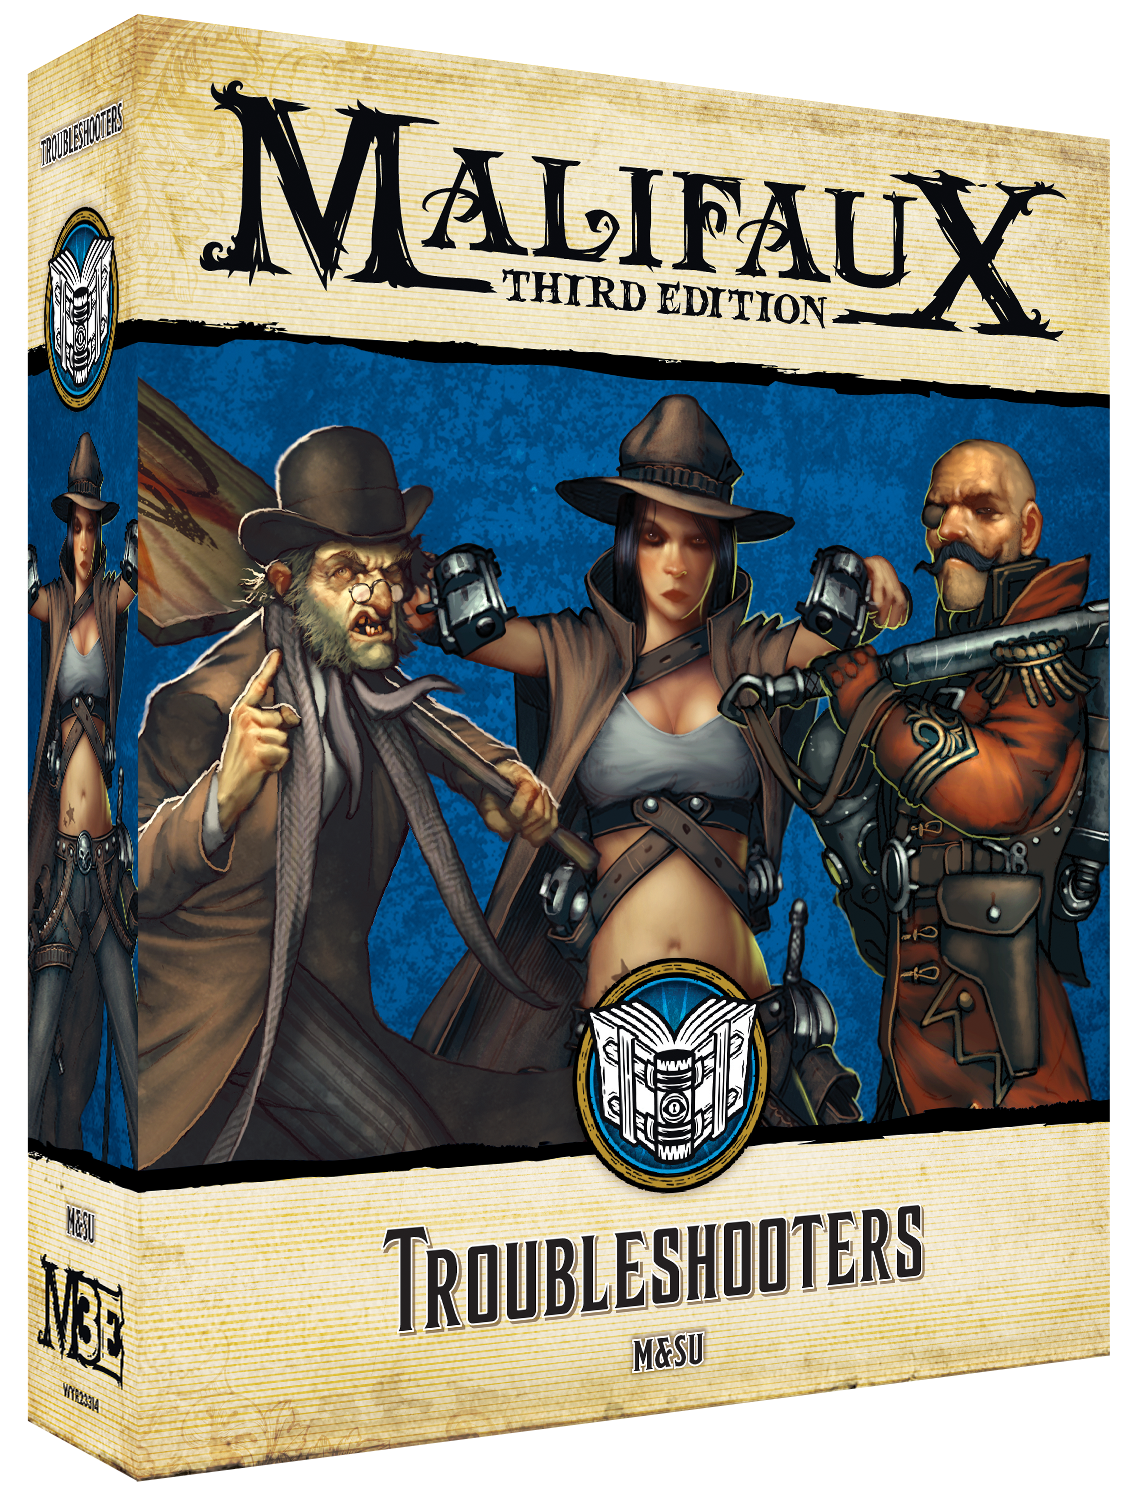 TROUBLESHOOTERS